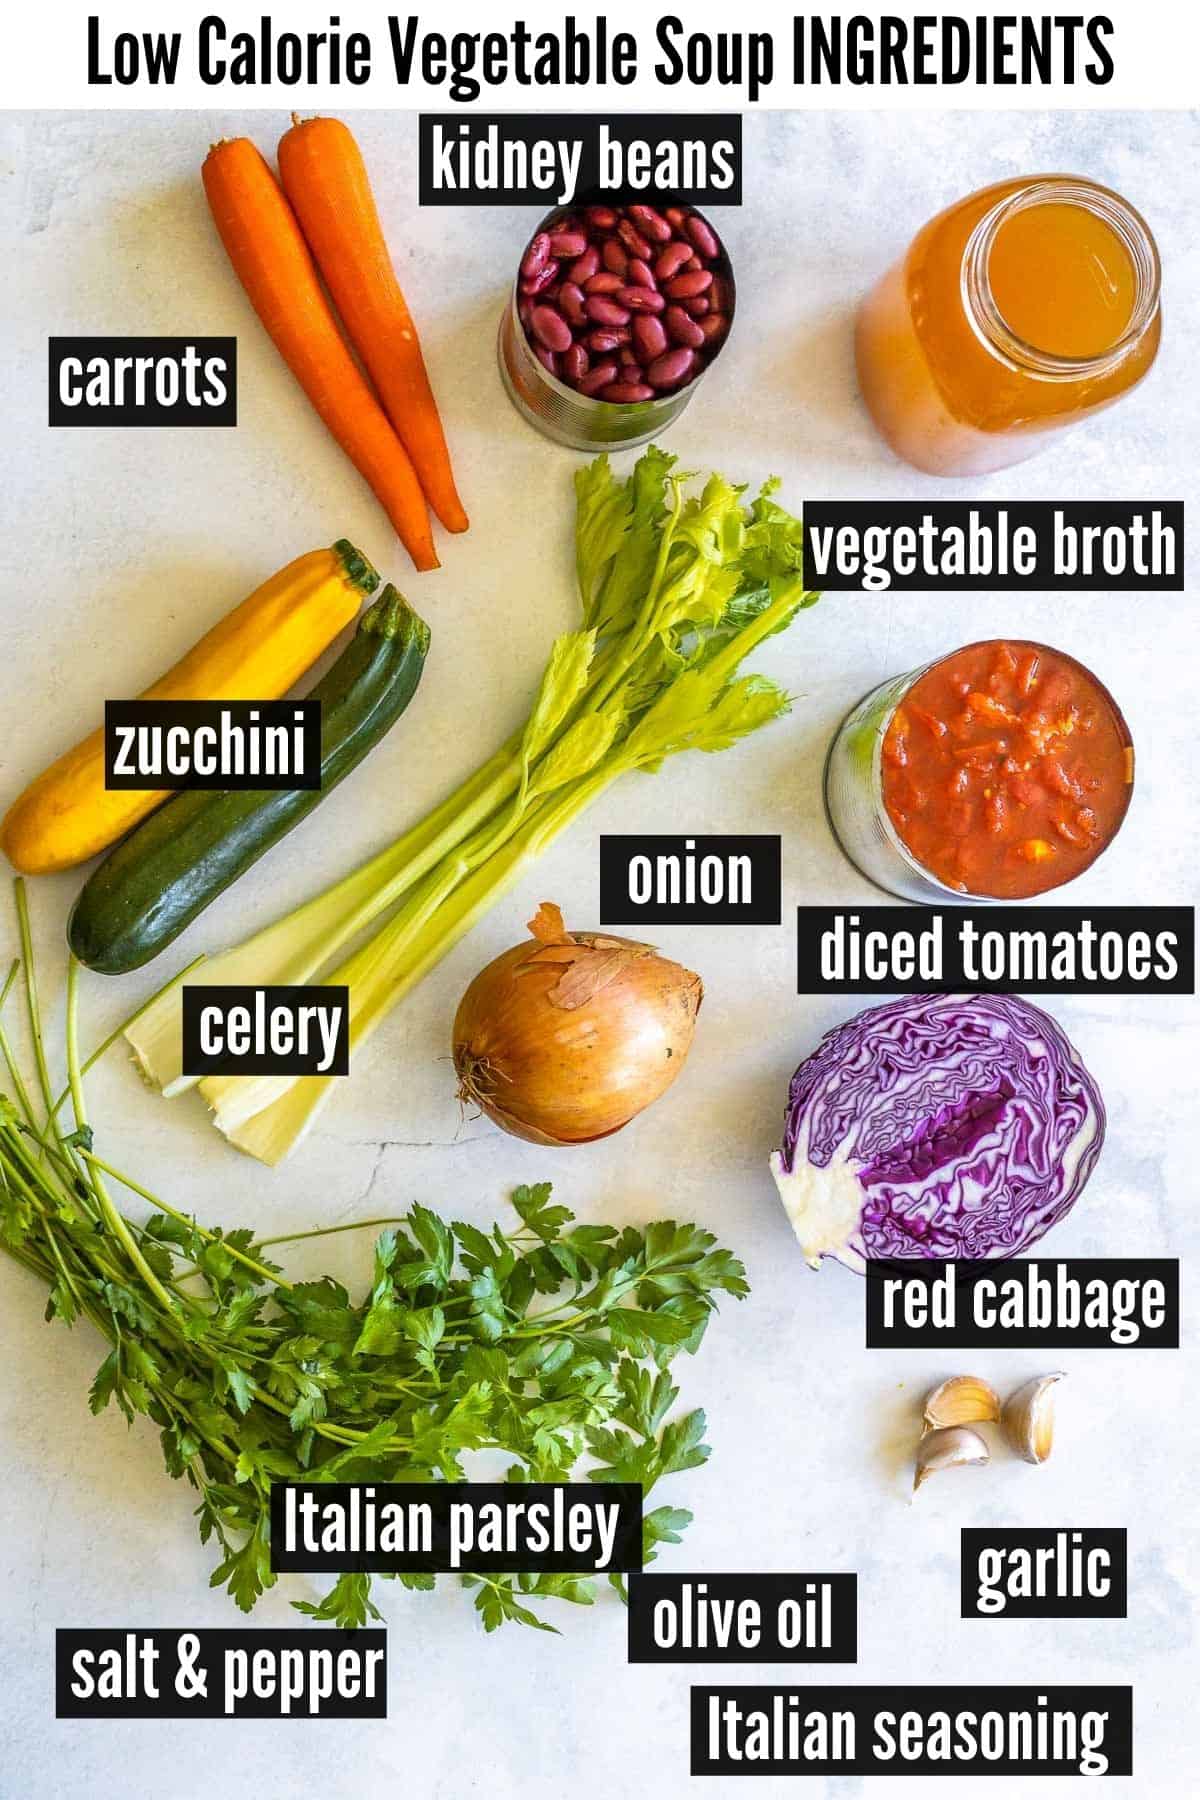 low calorie vegetable soup ingredients labelled 